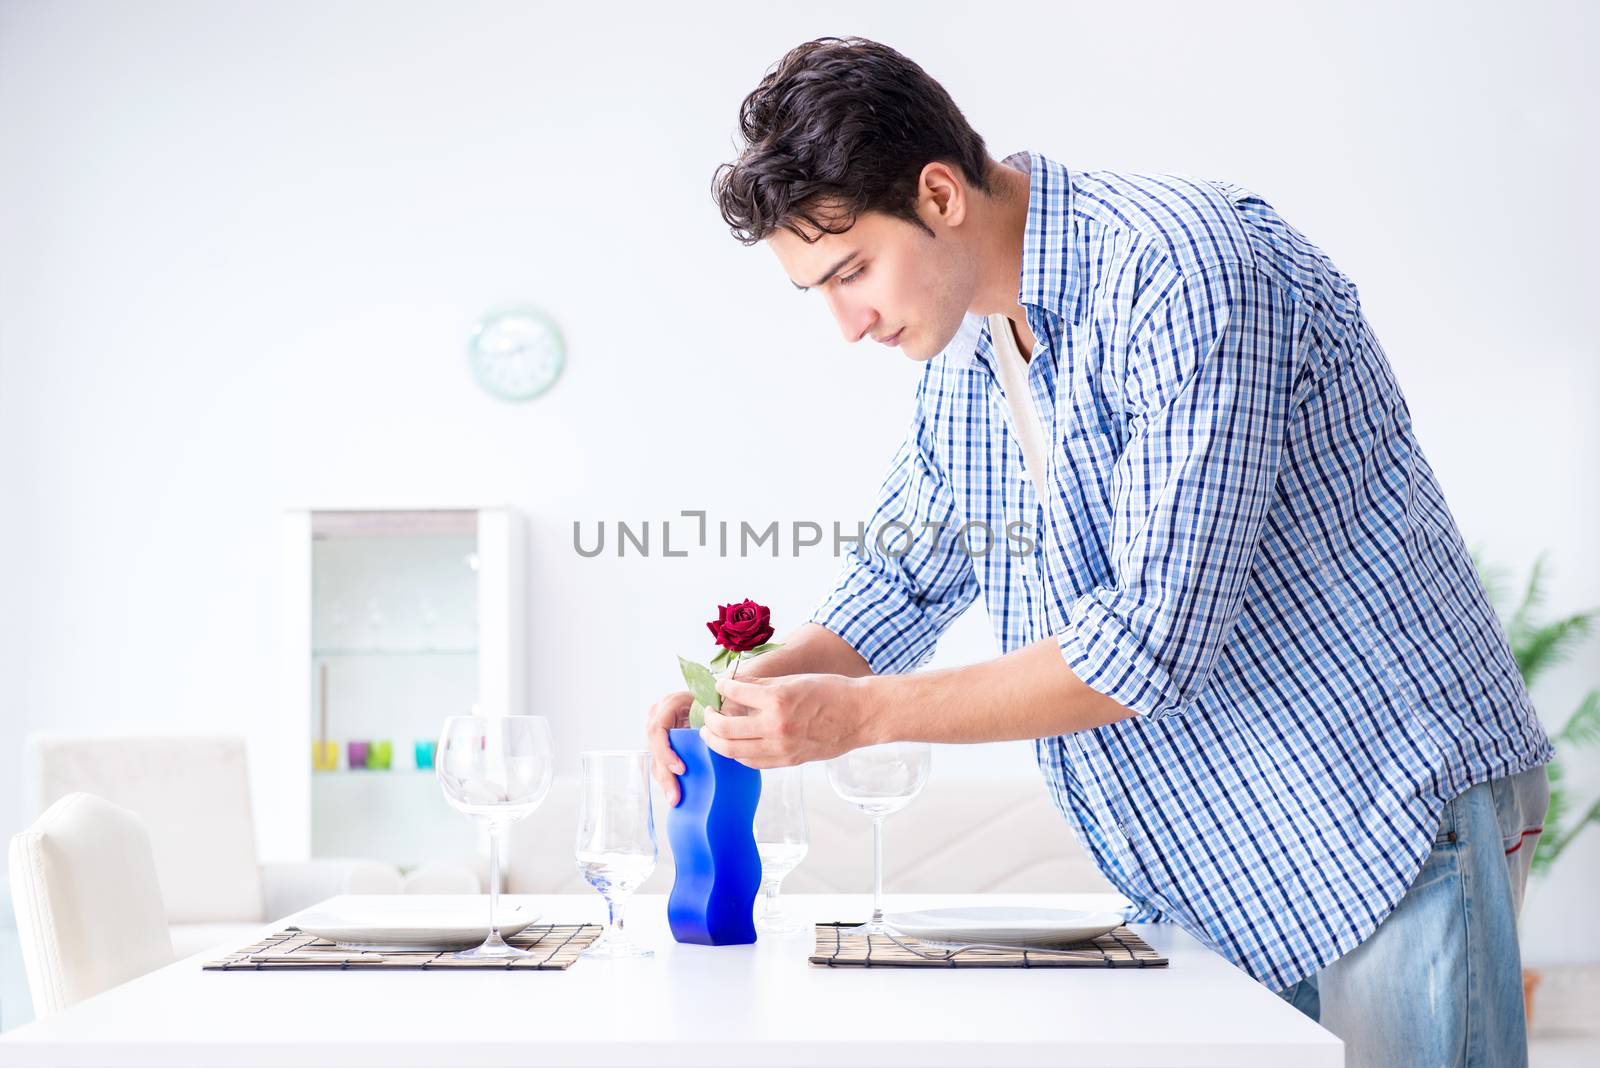 Man alone preparing for romantic date with his sweetheart by Elnur